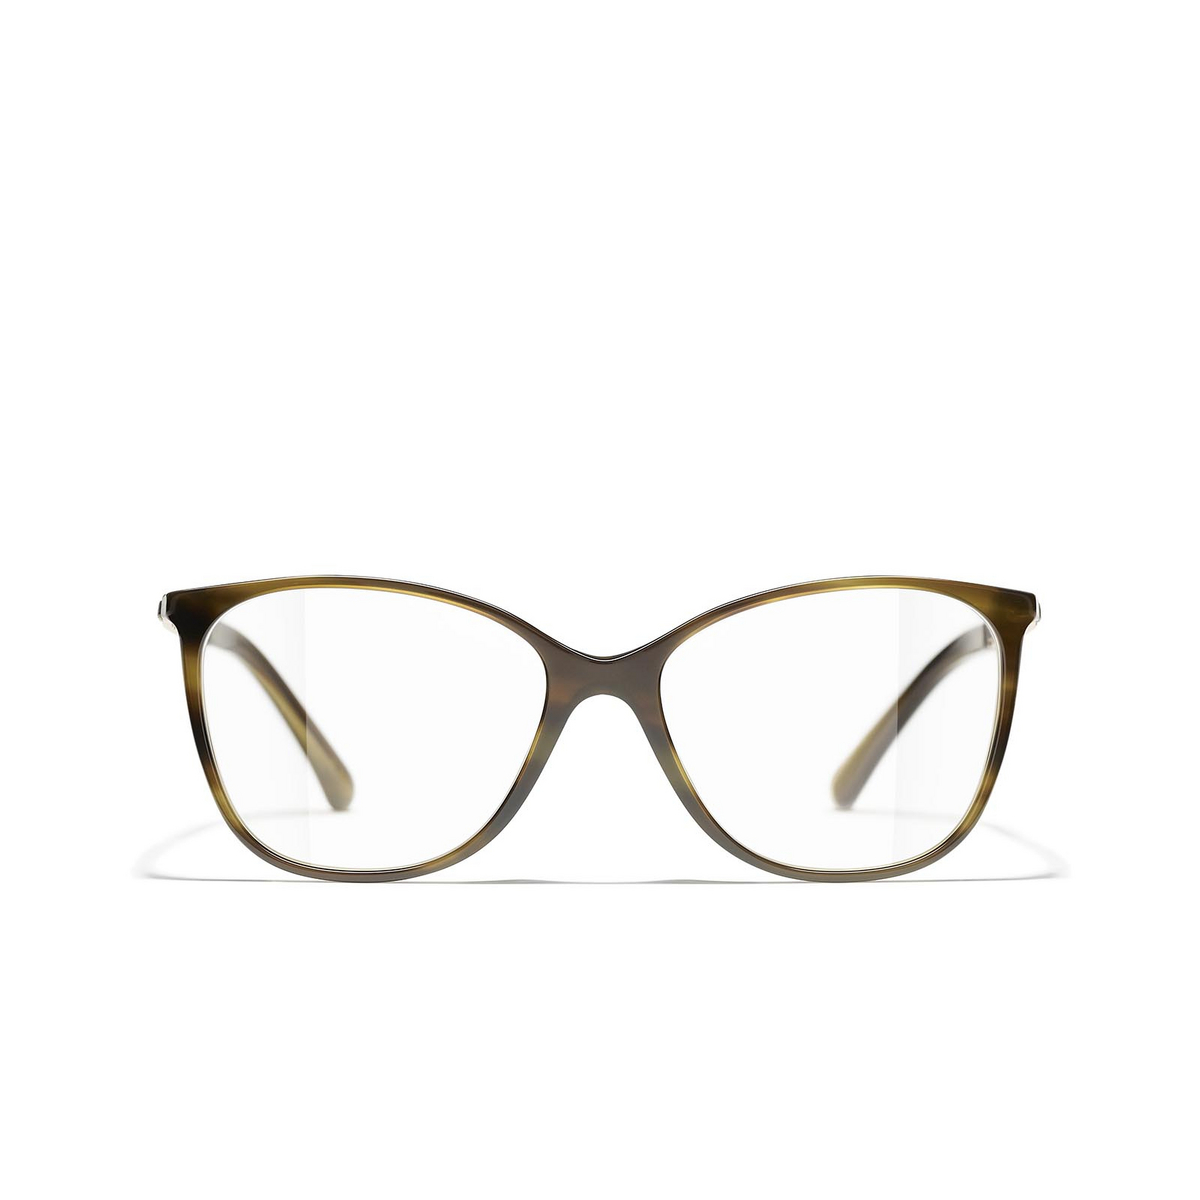 CHANEL square Eyeglasses 1579 Green Tortoise - front view